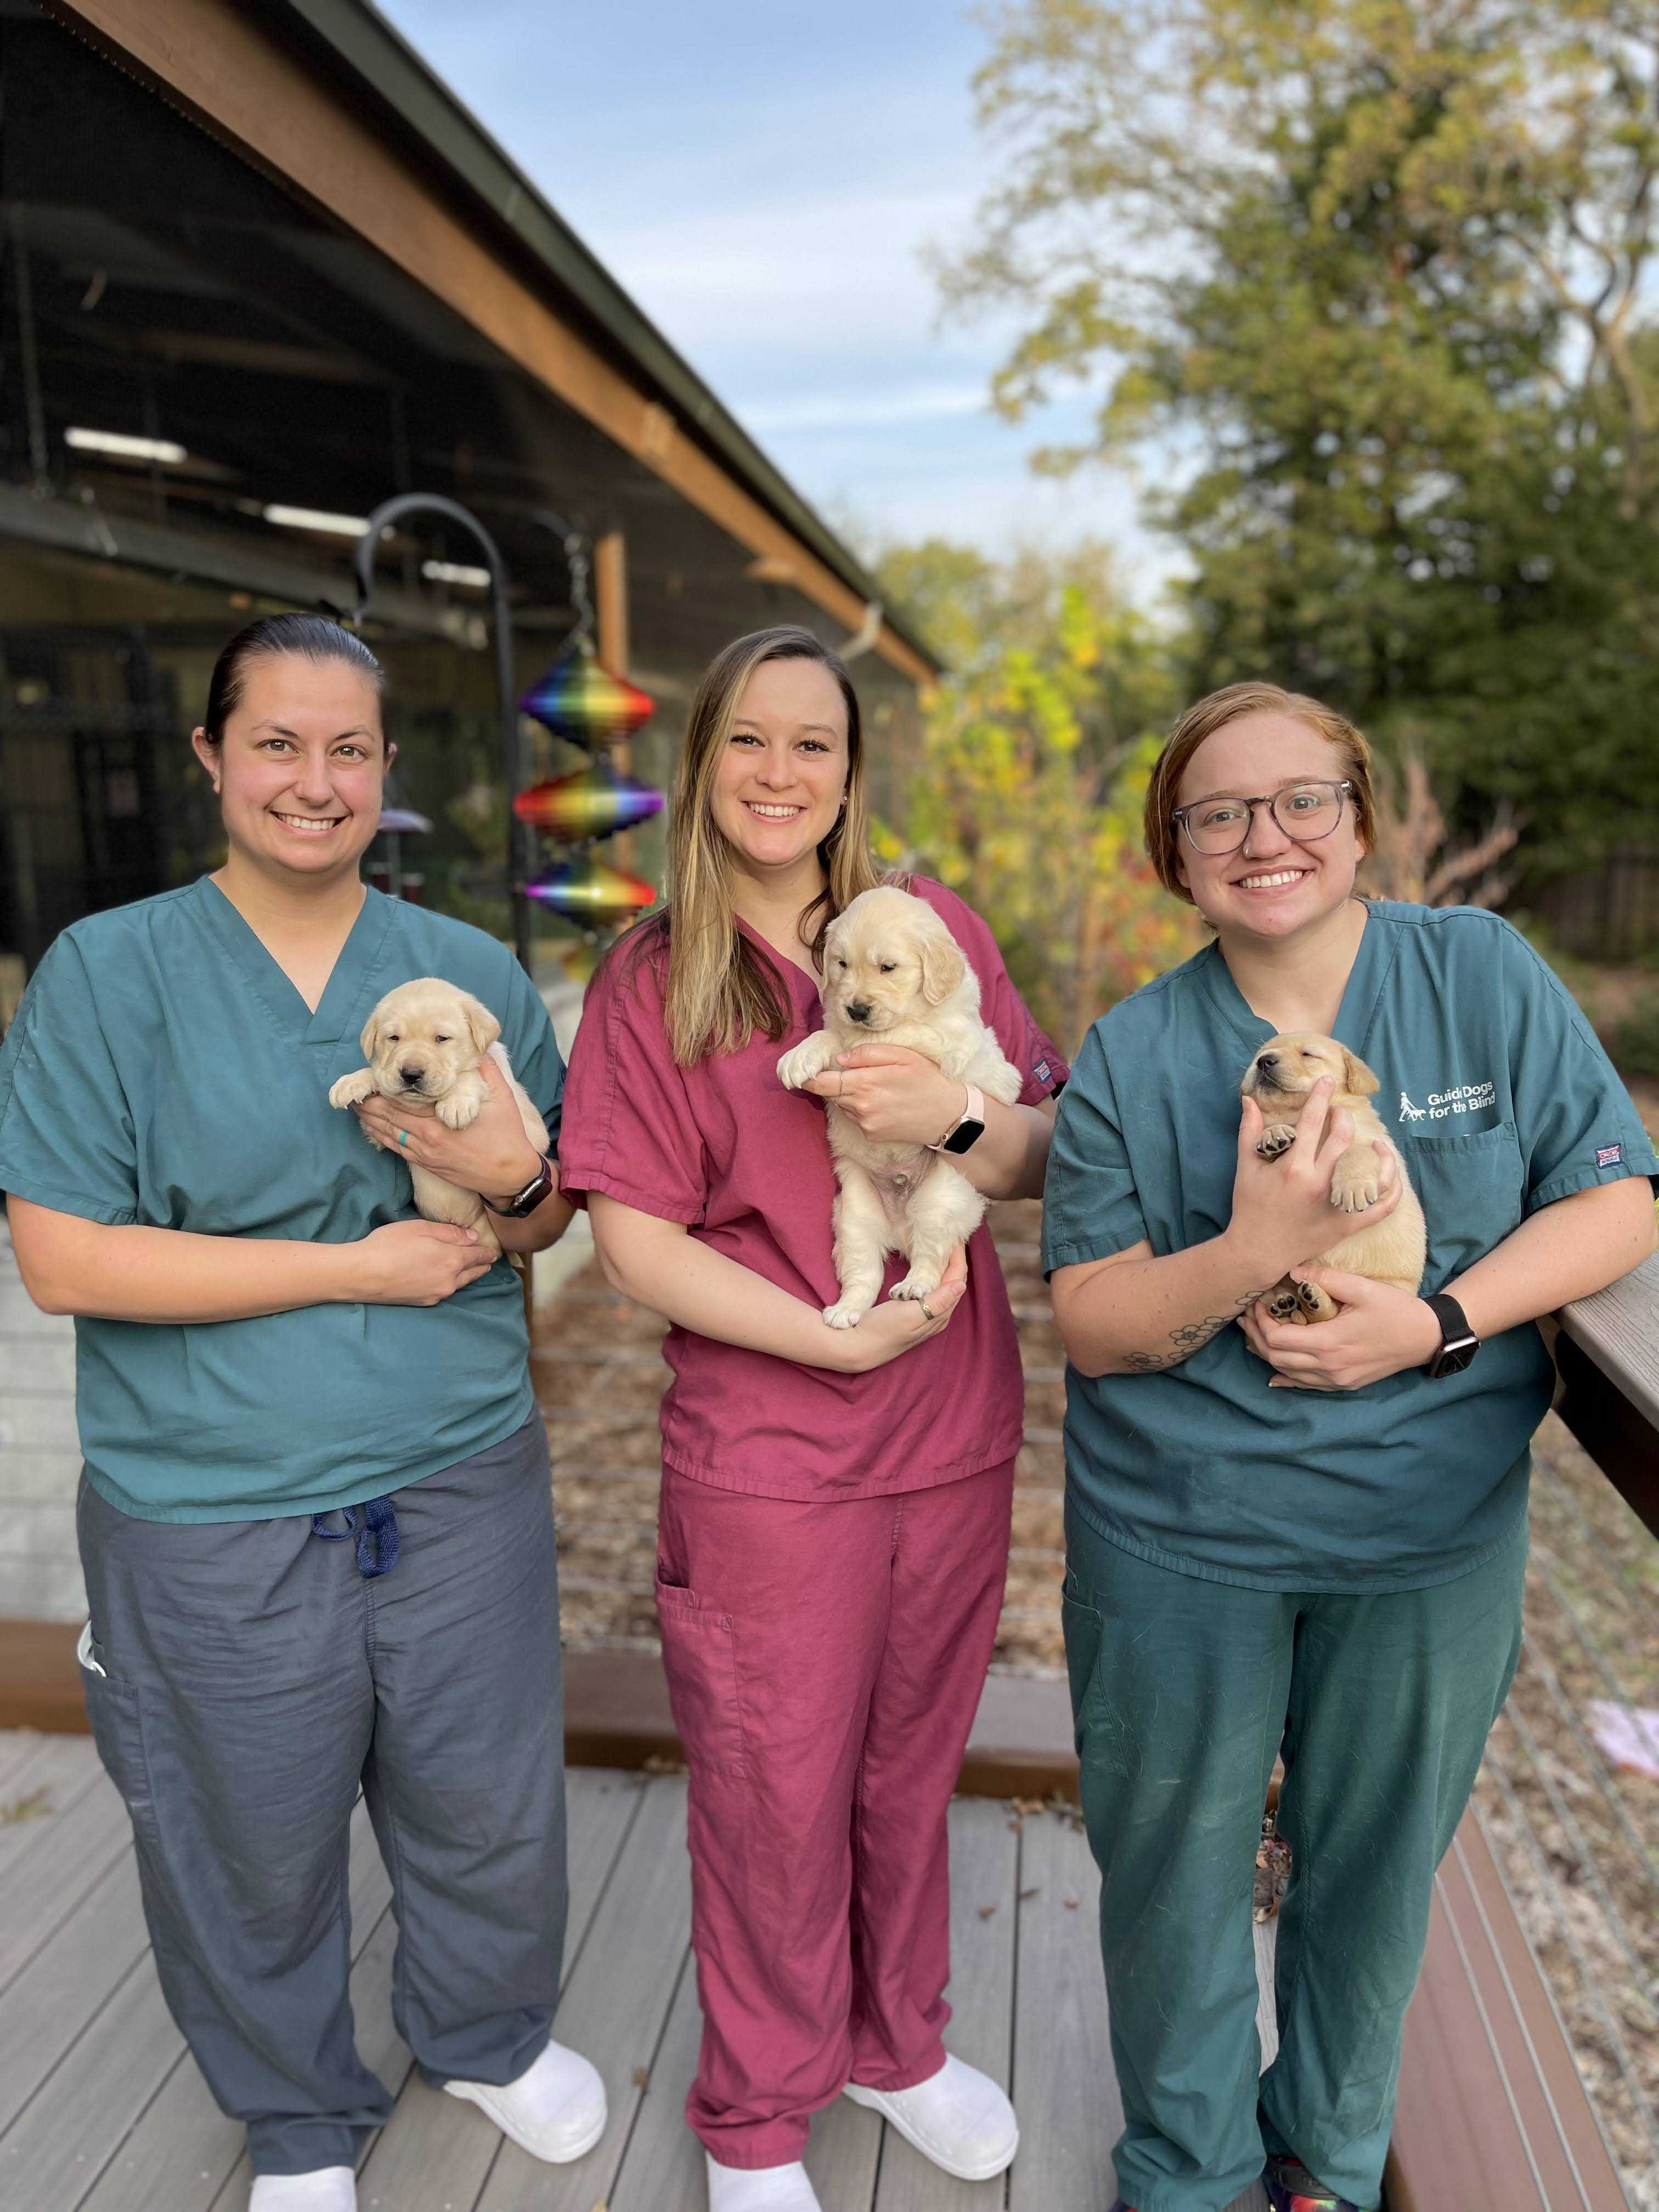 Three GDB staff members wearing scrubs each hold a young yellow Lab puppy in their arms outside the GDB Puppy Center.